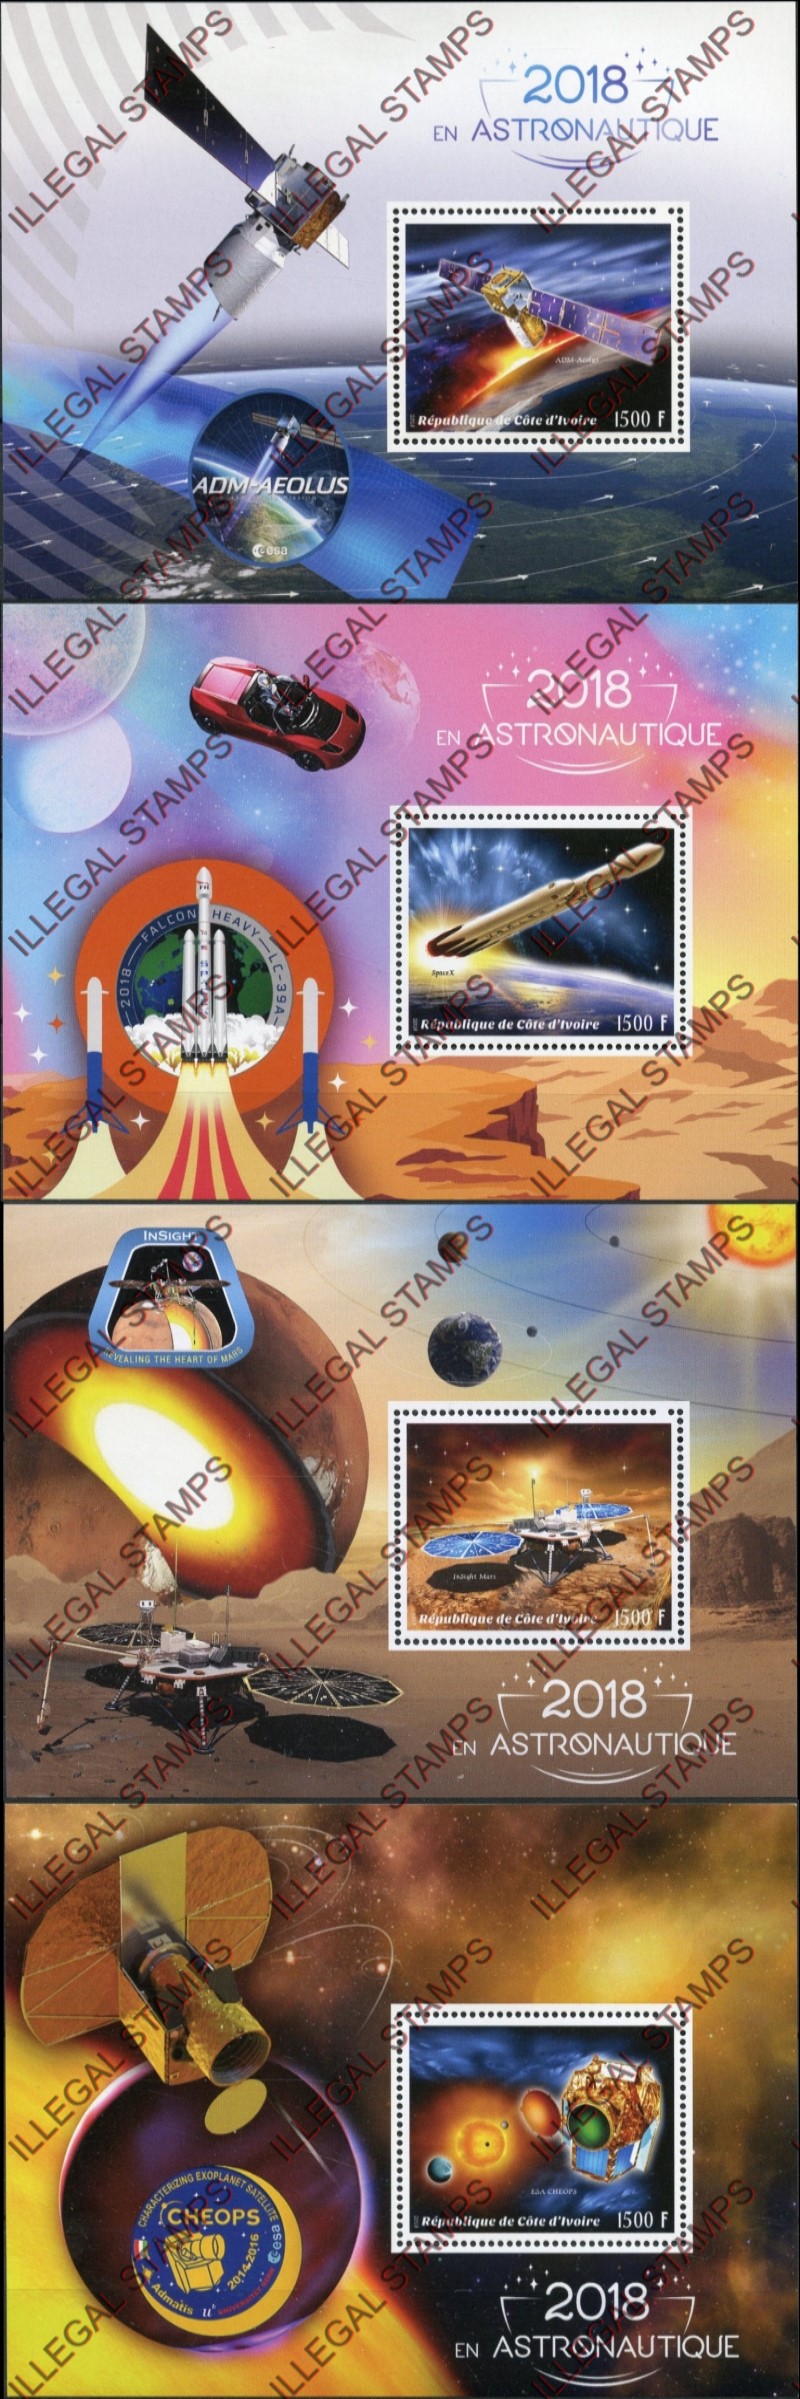 Ivory Coast 2018 Space Illegal Stamp Souvenir Sheets of 1